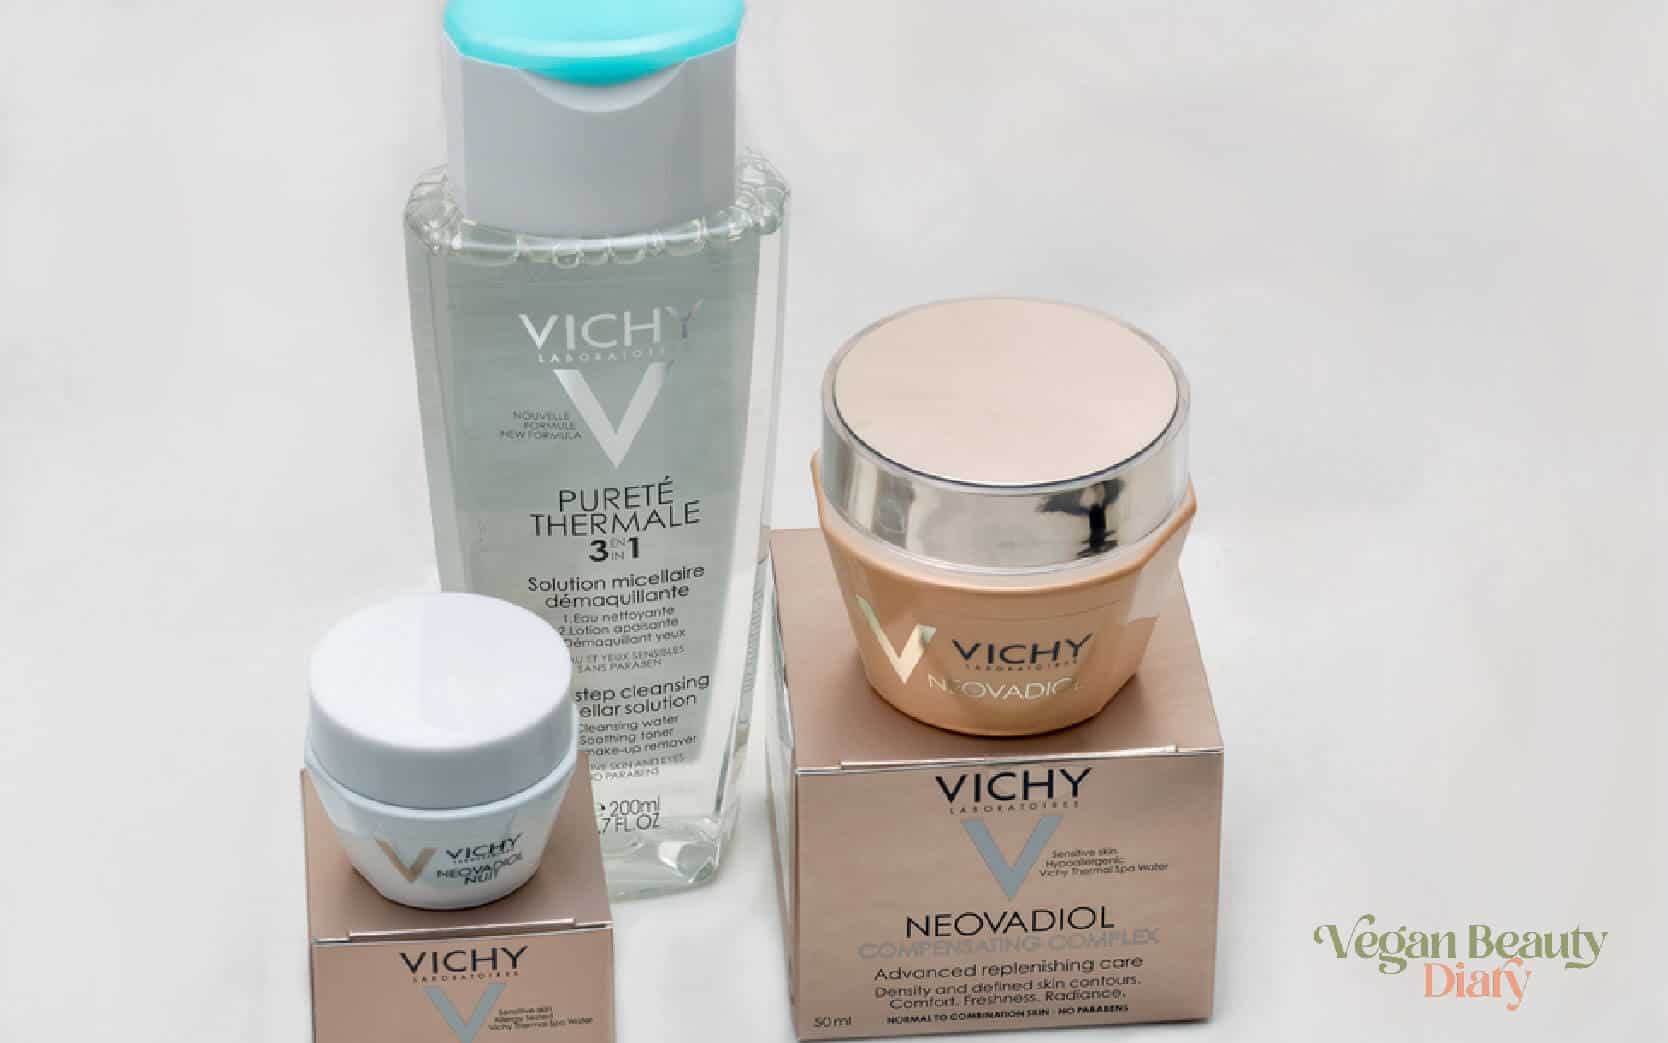 Is Vichy Cruelty-Free?